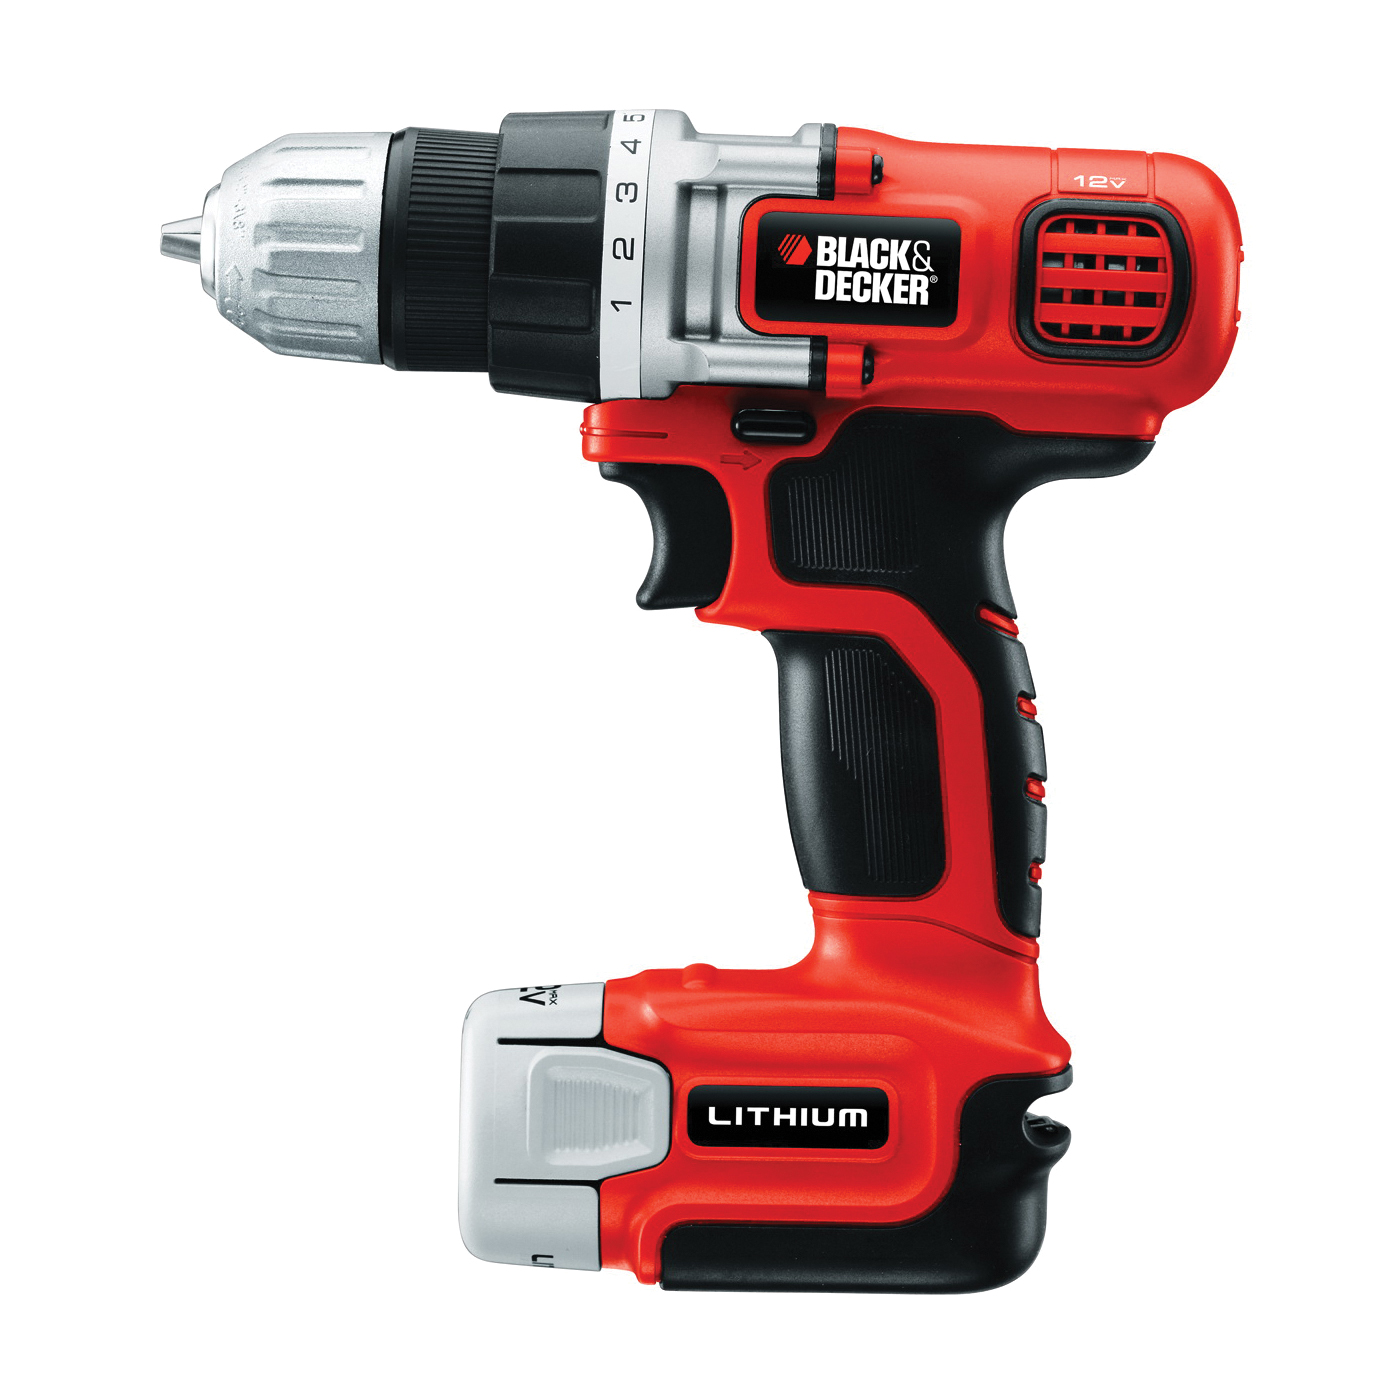 Black+Decker 12 V 3/8 in. Brushed Cordless Drill Kit (Battery & Charger) - 2